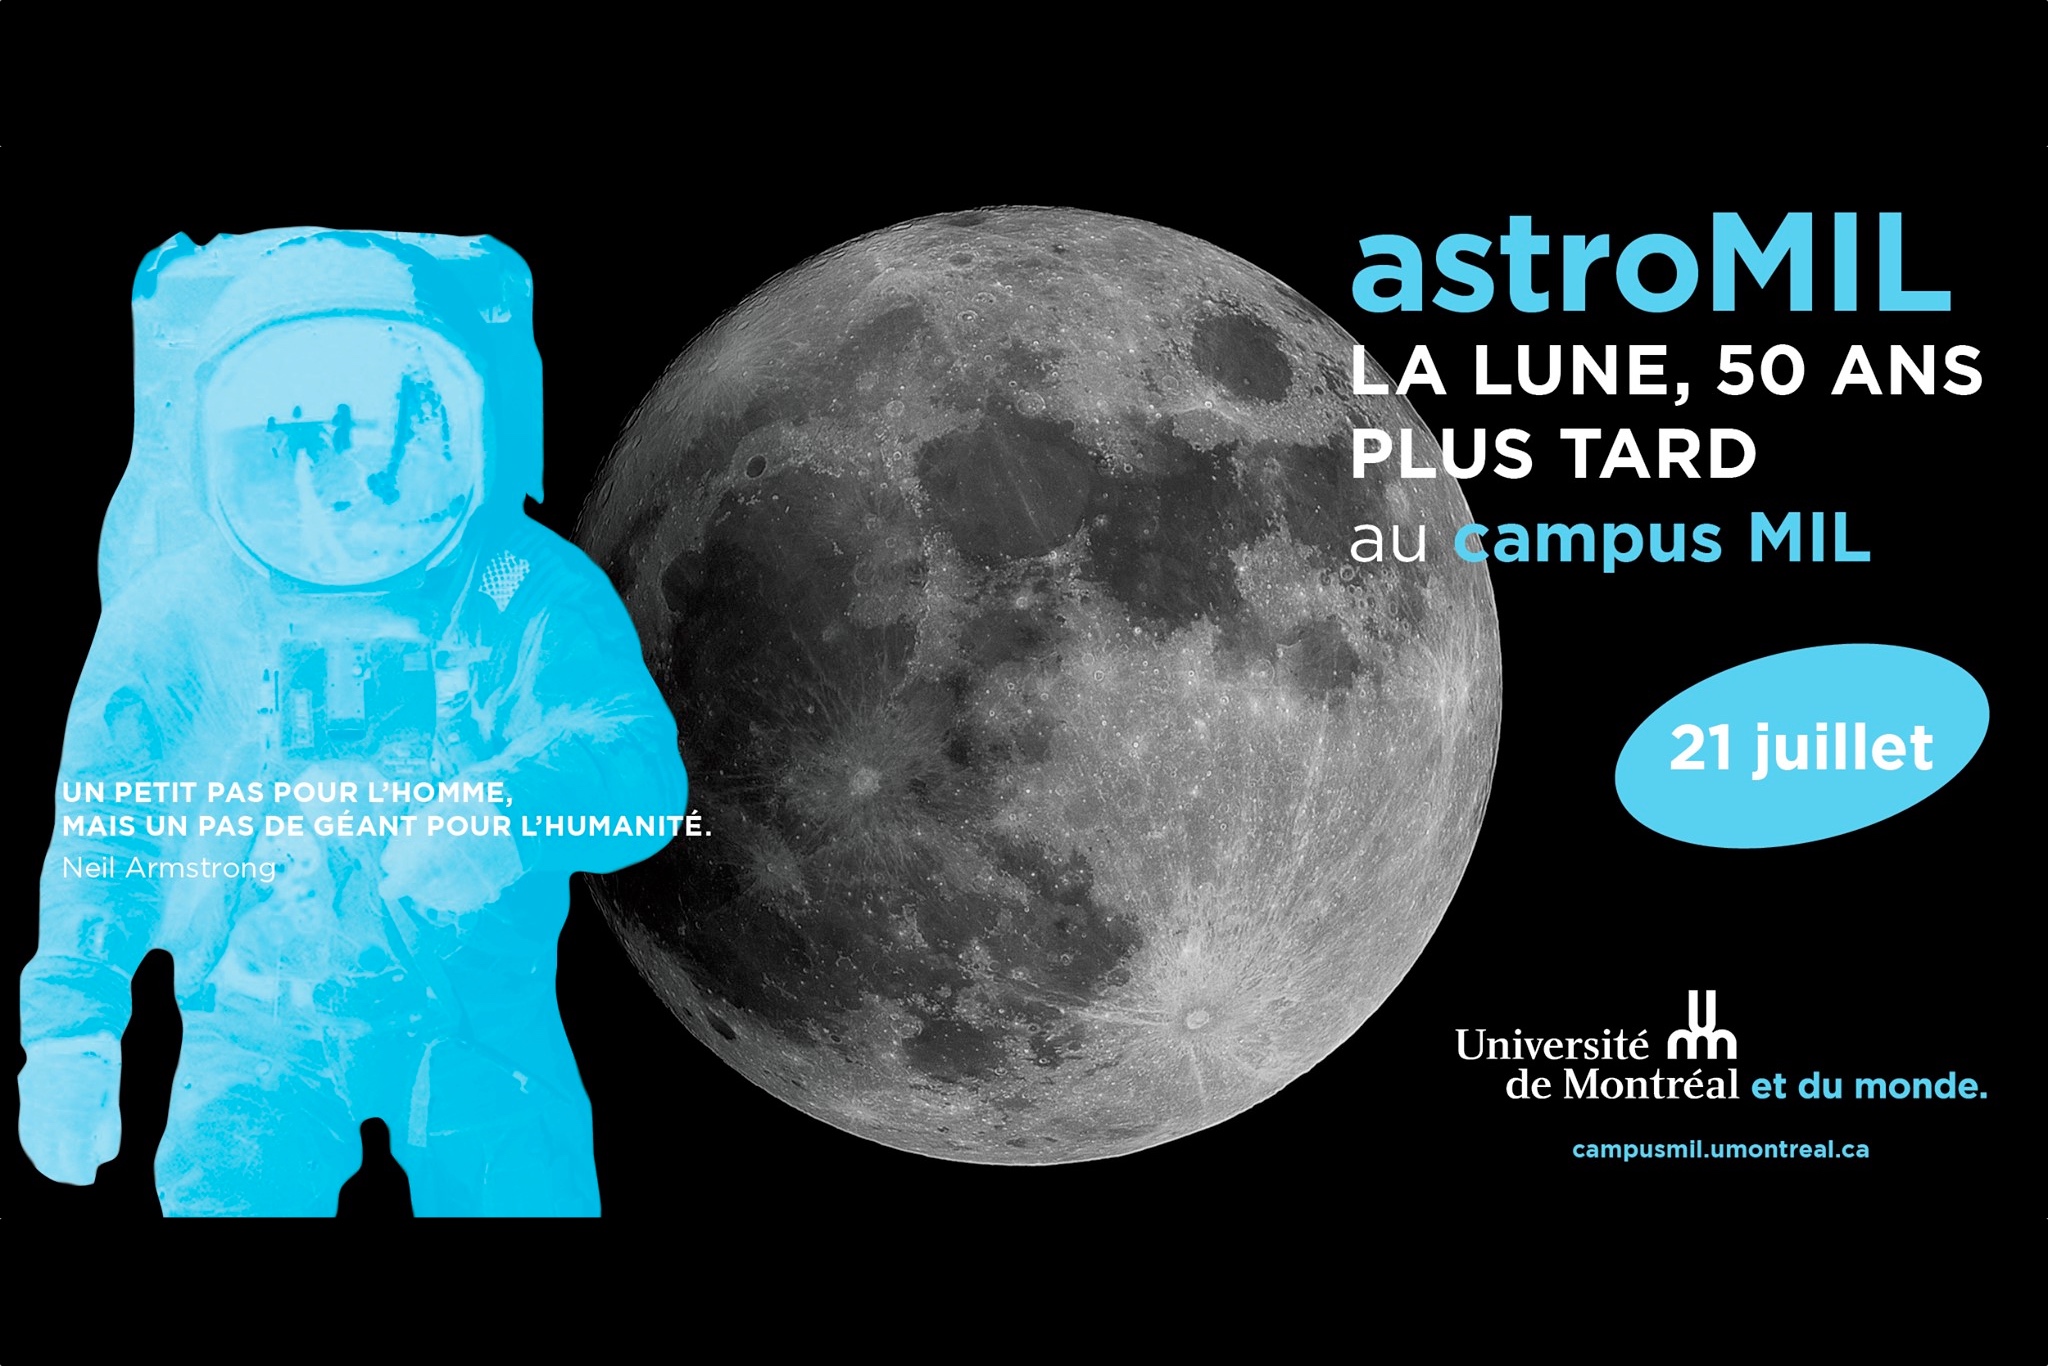 astroMIL 2019: the Moon, 50 years later